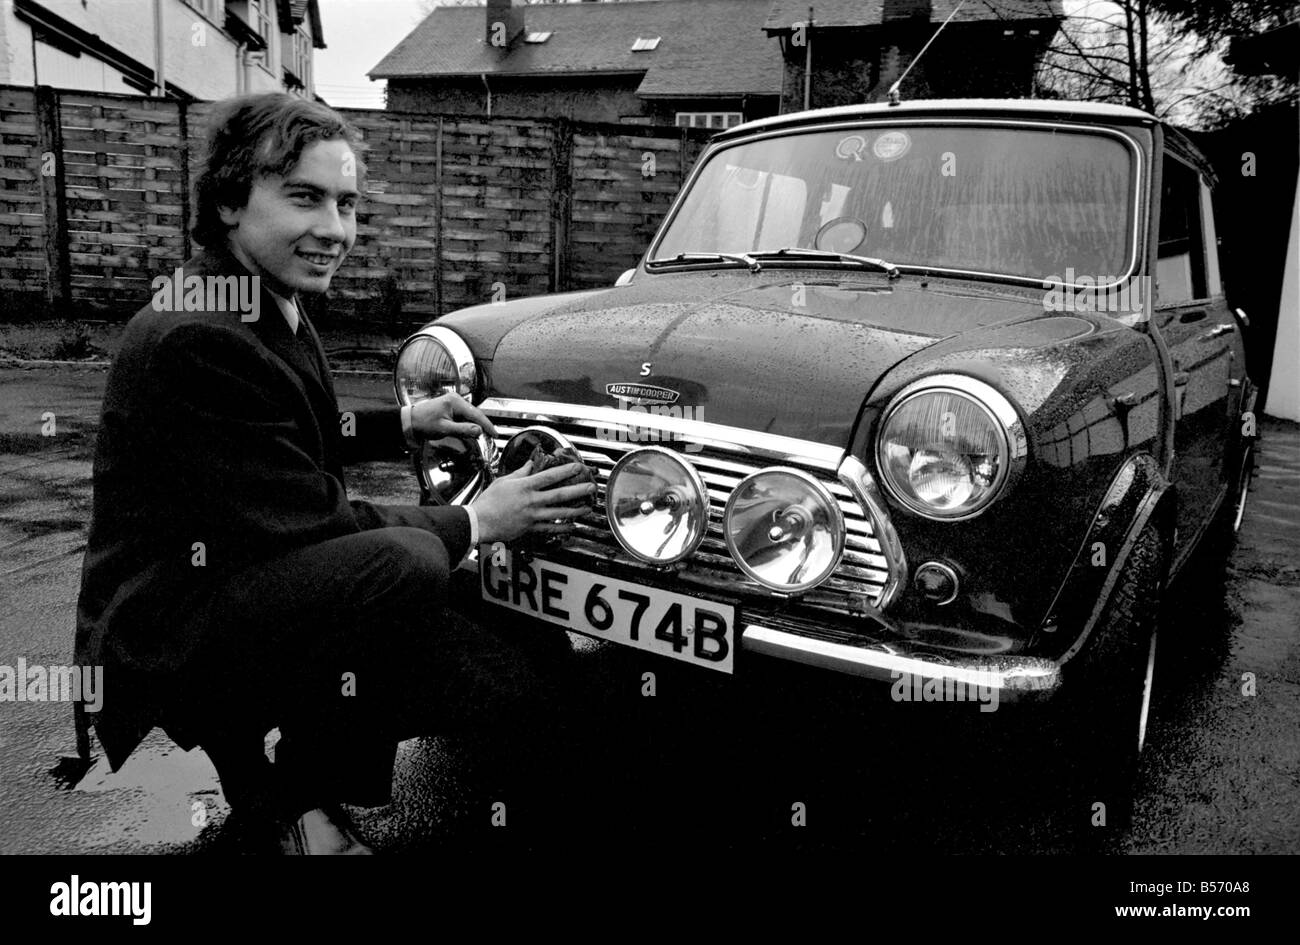 Peter Copestick (20) of Seabridge Lane, Newcastle-under Lyme, staffs has a super mini car although it is 6 years old. Dec. 1969 Stock Photo